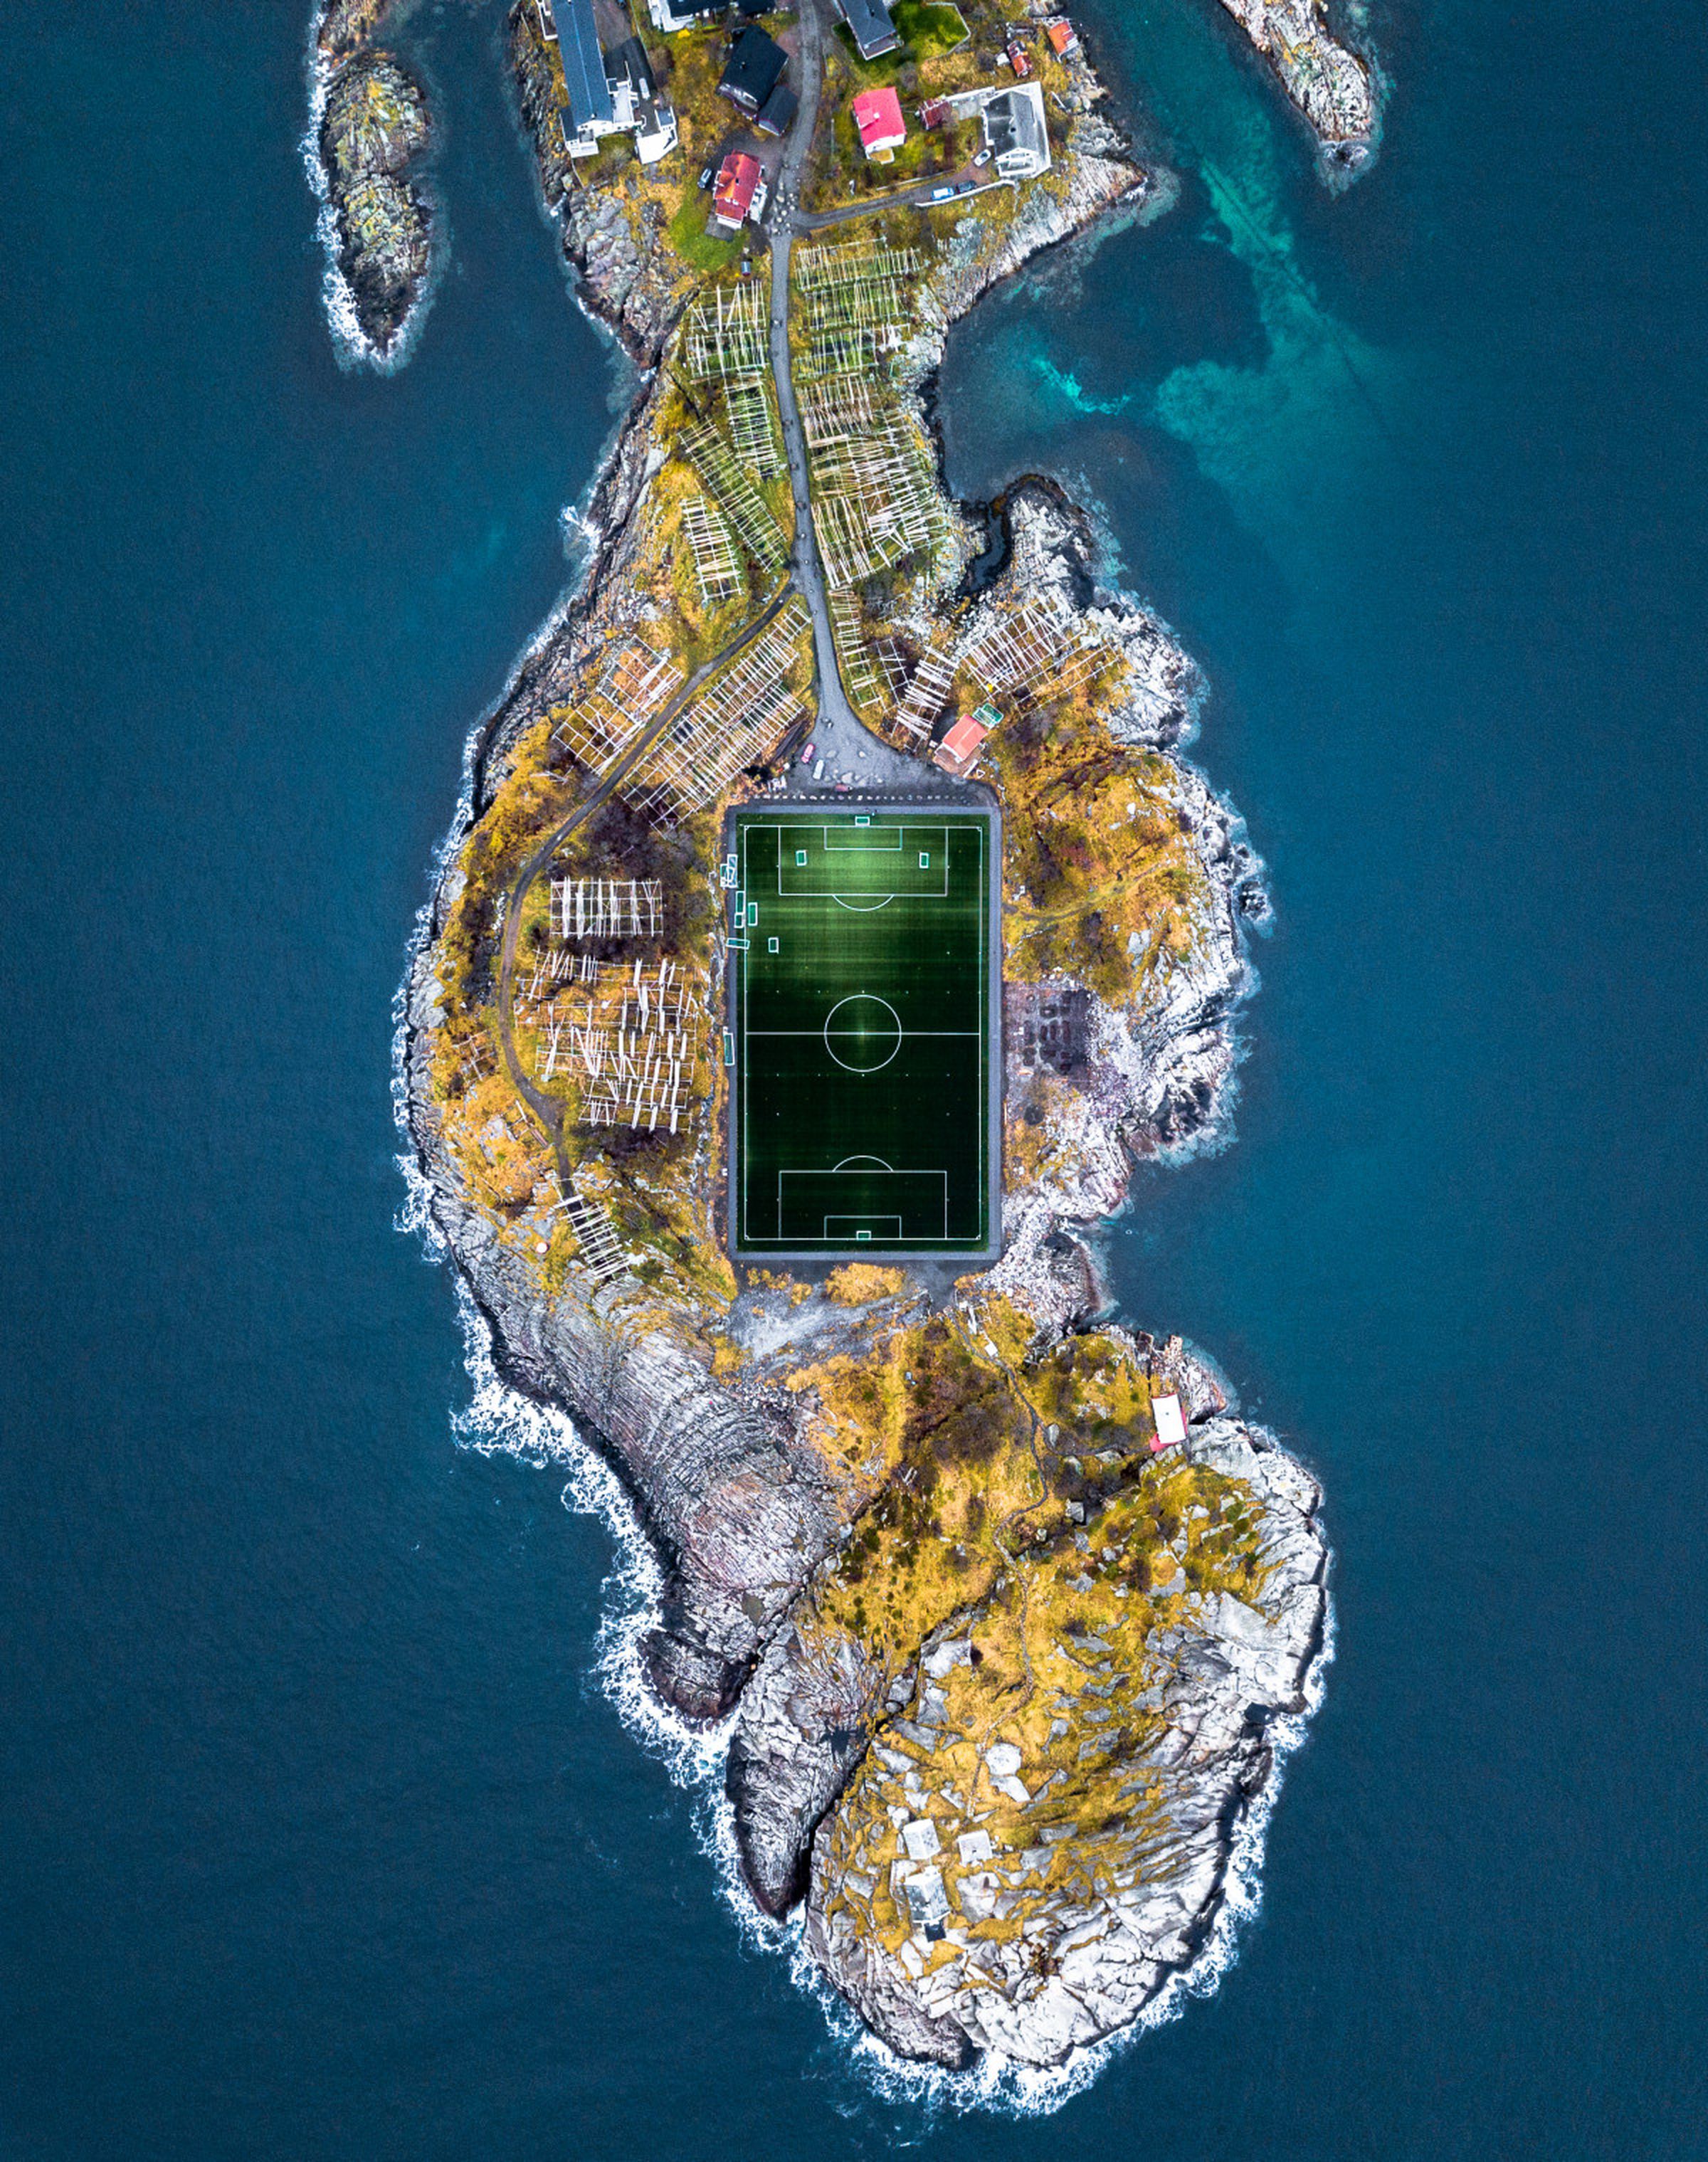 People’s Choice; “Lofoten.” An aerial view of a soccer pitch on an island in the Norwegian archipelago of Lofoten.